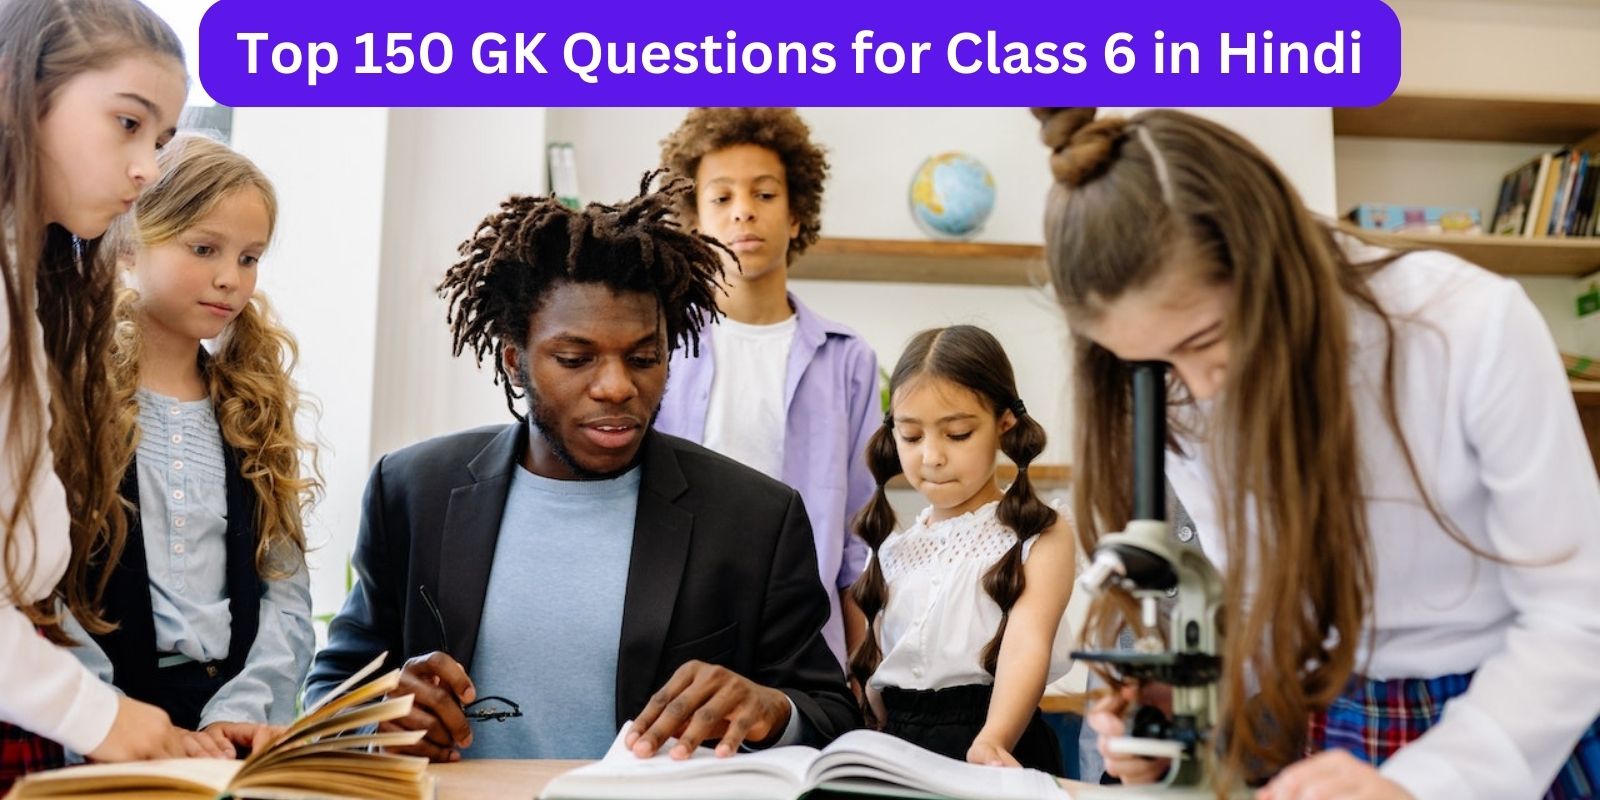 Top 150 GK Questions for Class 6 in Hindi